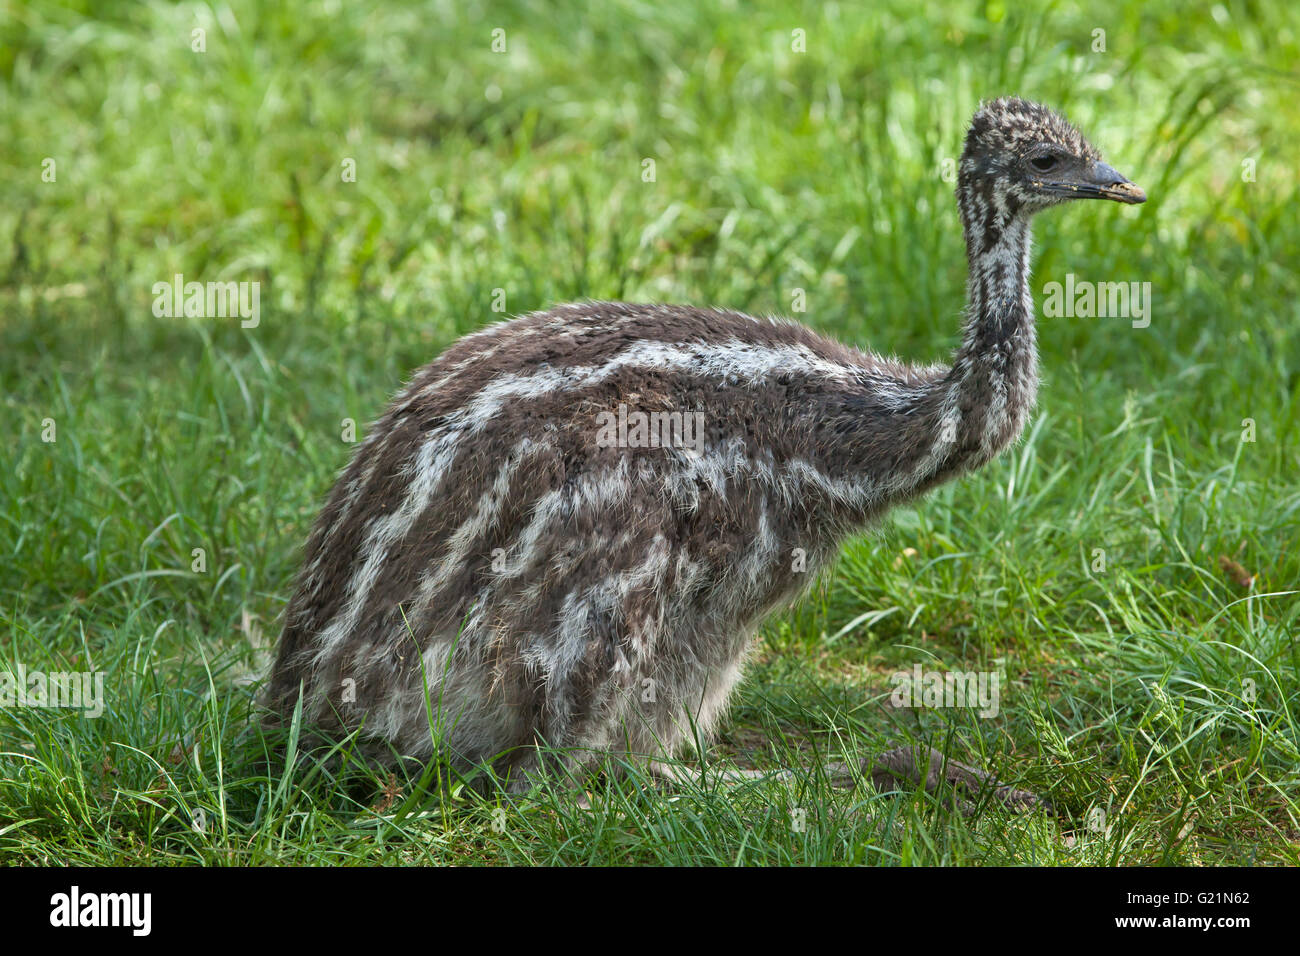 Two-month-old emu (Dromaius novaehollandiae) at Prague Zoo, Czech Republic. The chick hatched at the turn of February and March Stock Photo